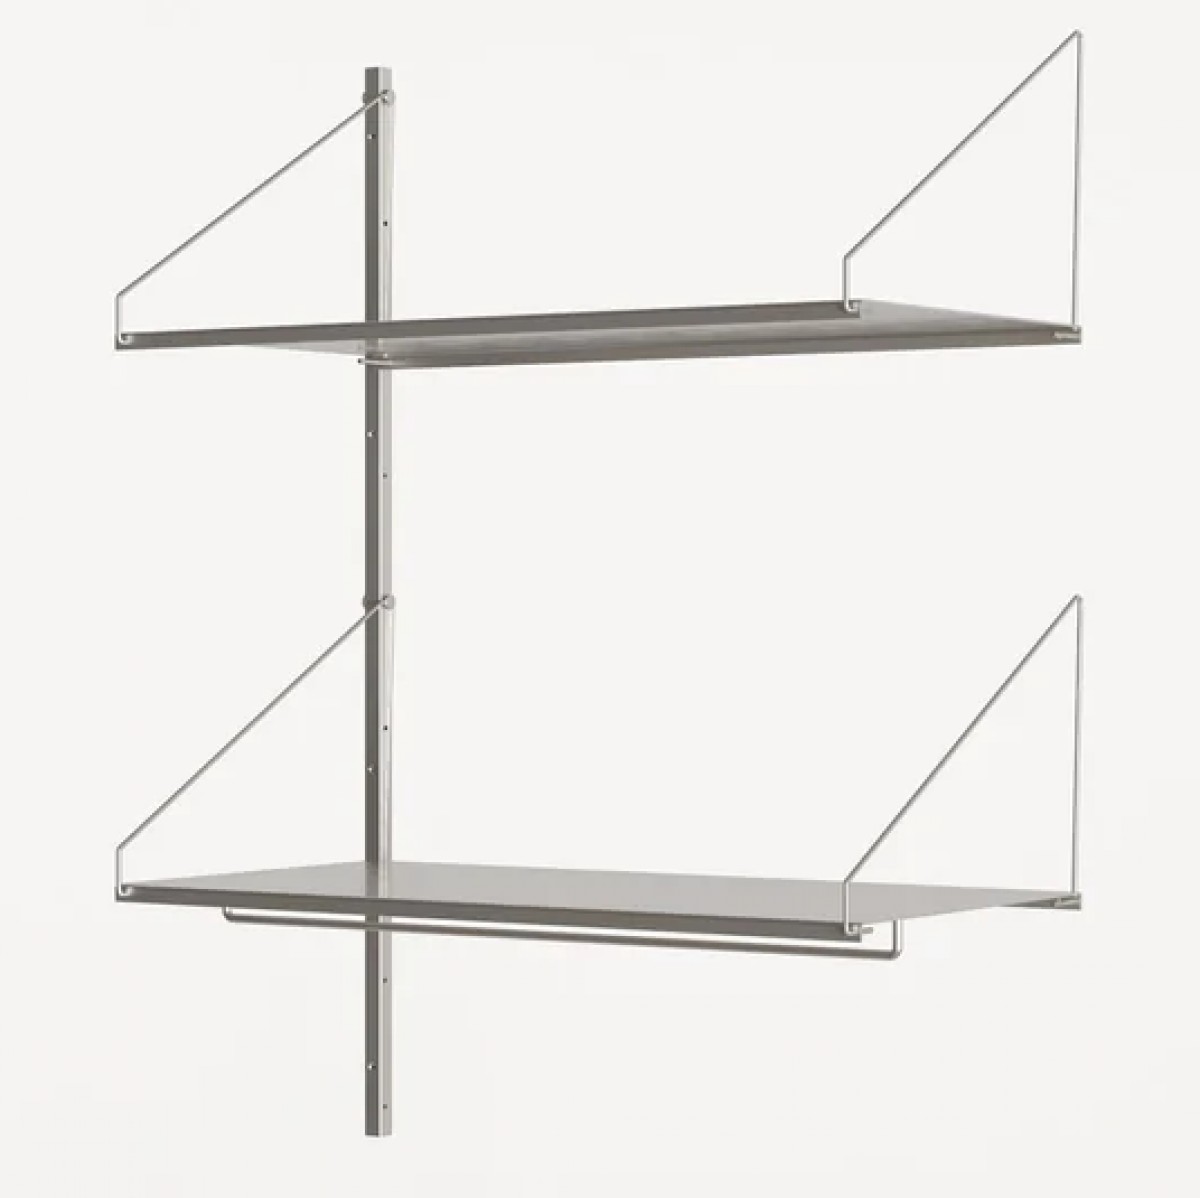 Shelf Library Stainless Steel H1084 - Hanger Add-On Section